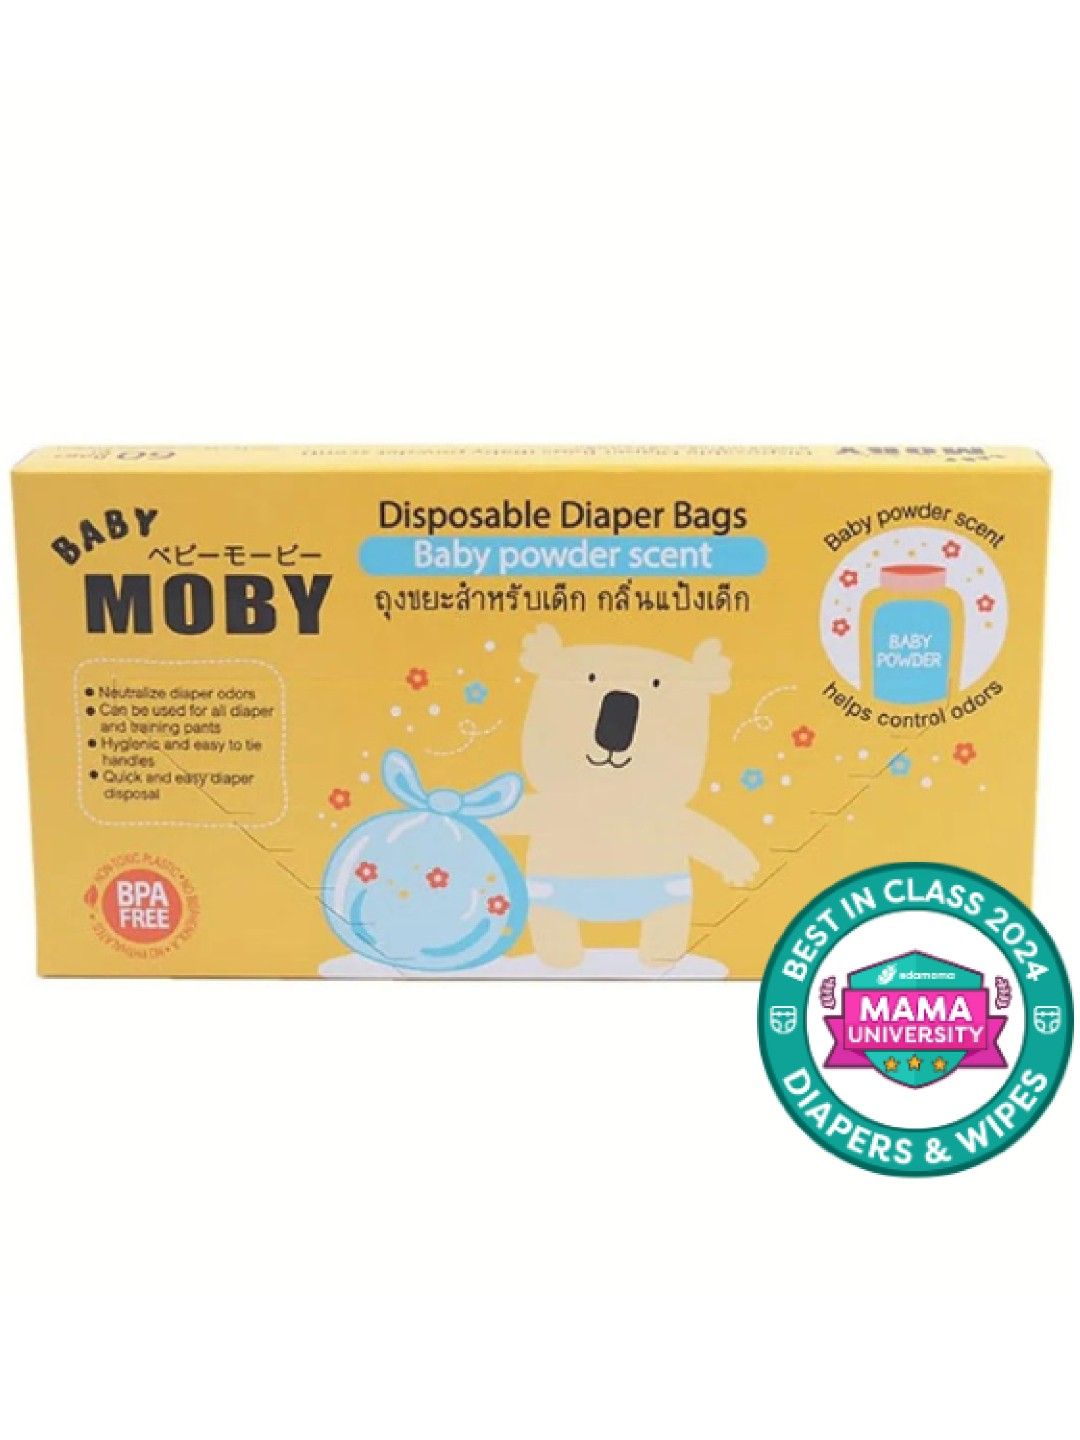 Baby Moby Disposable Diaper Bags